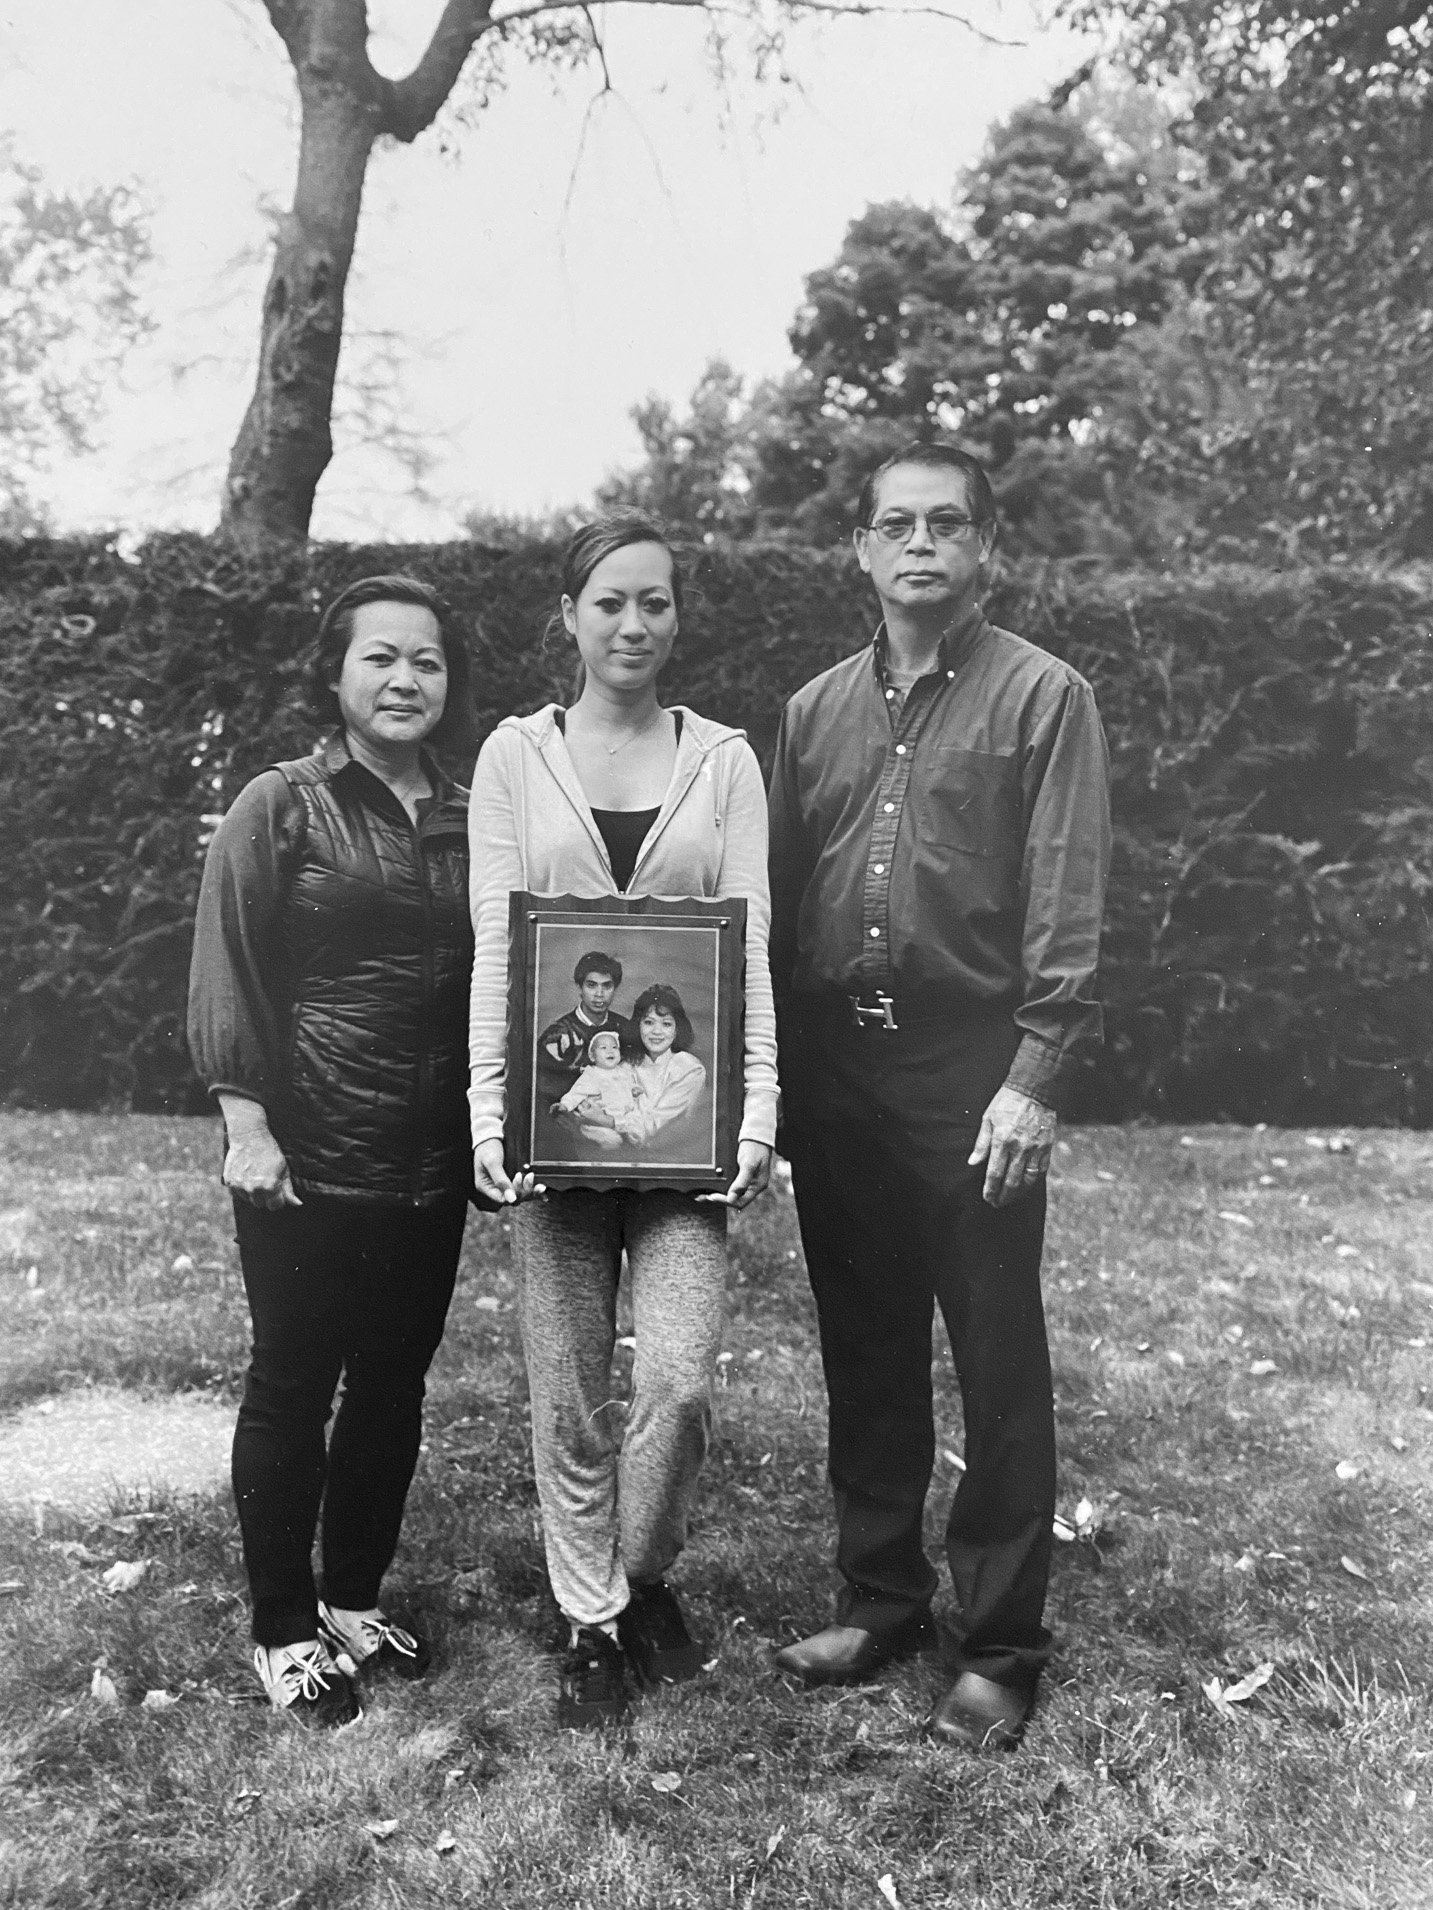 Three people standing together while holding a portrait of three people